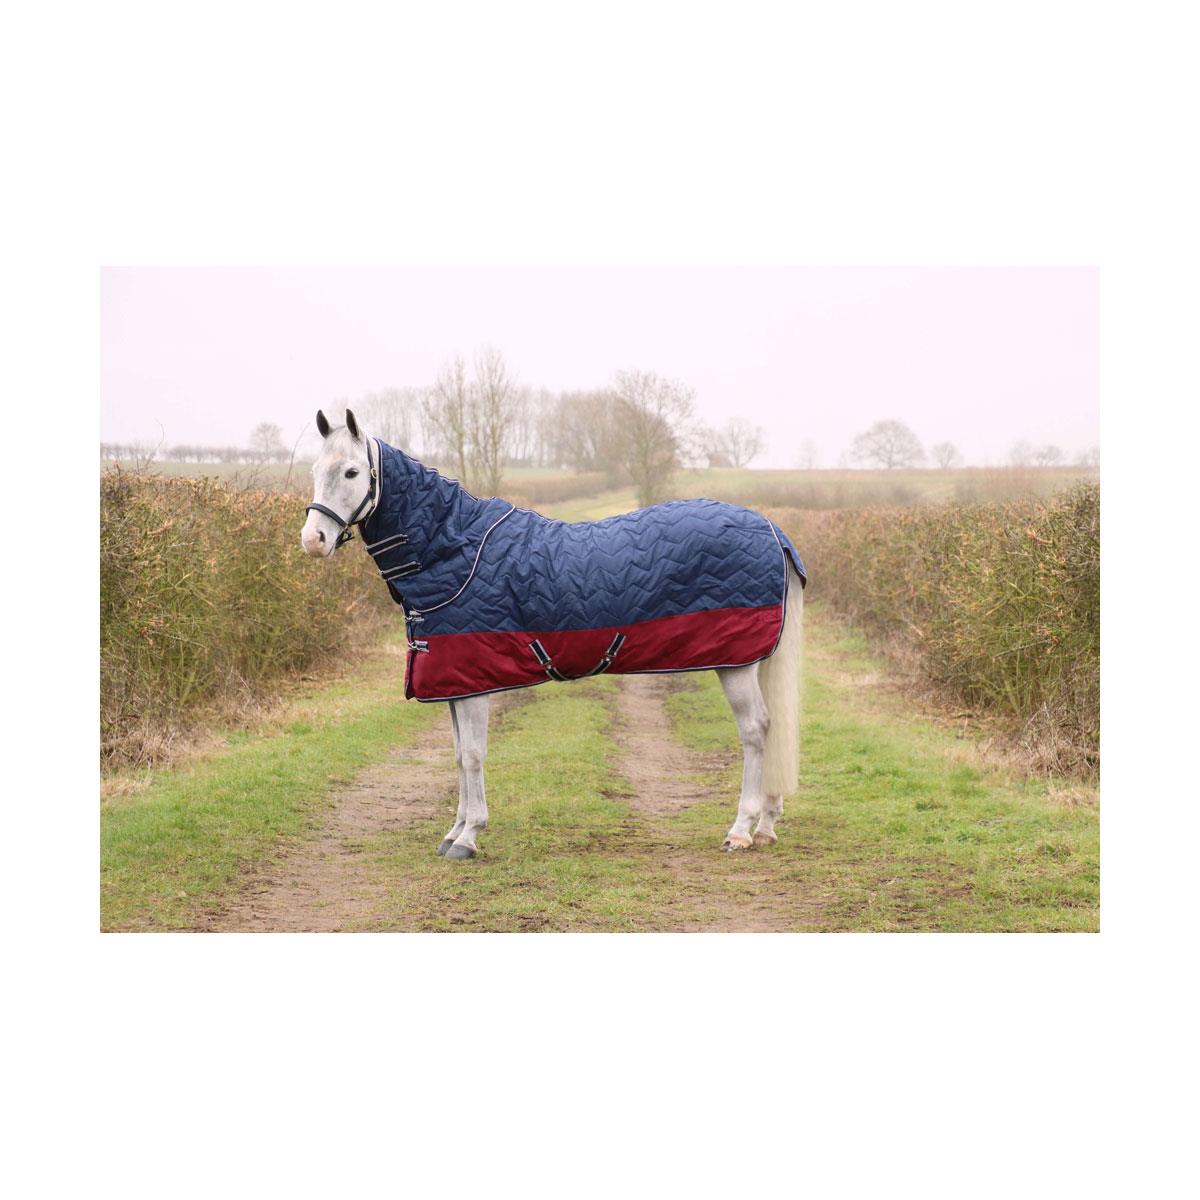 DefenceX System 400 Stable Rug 2 in 1 - Just Horse Riders